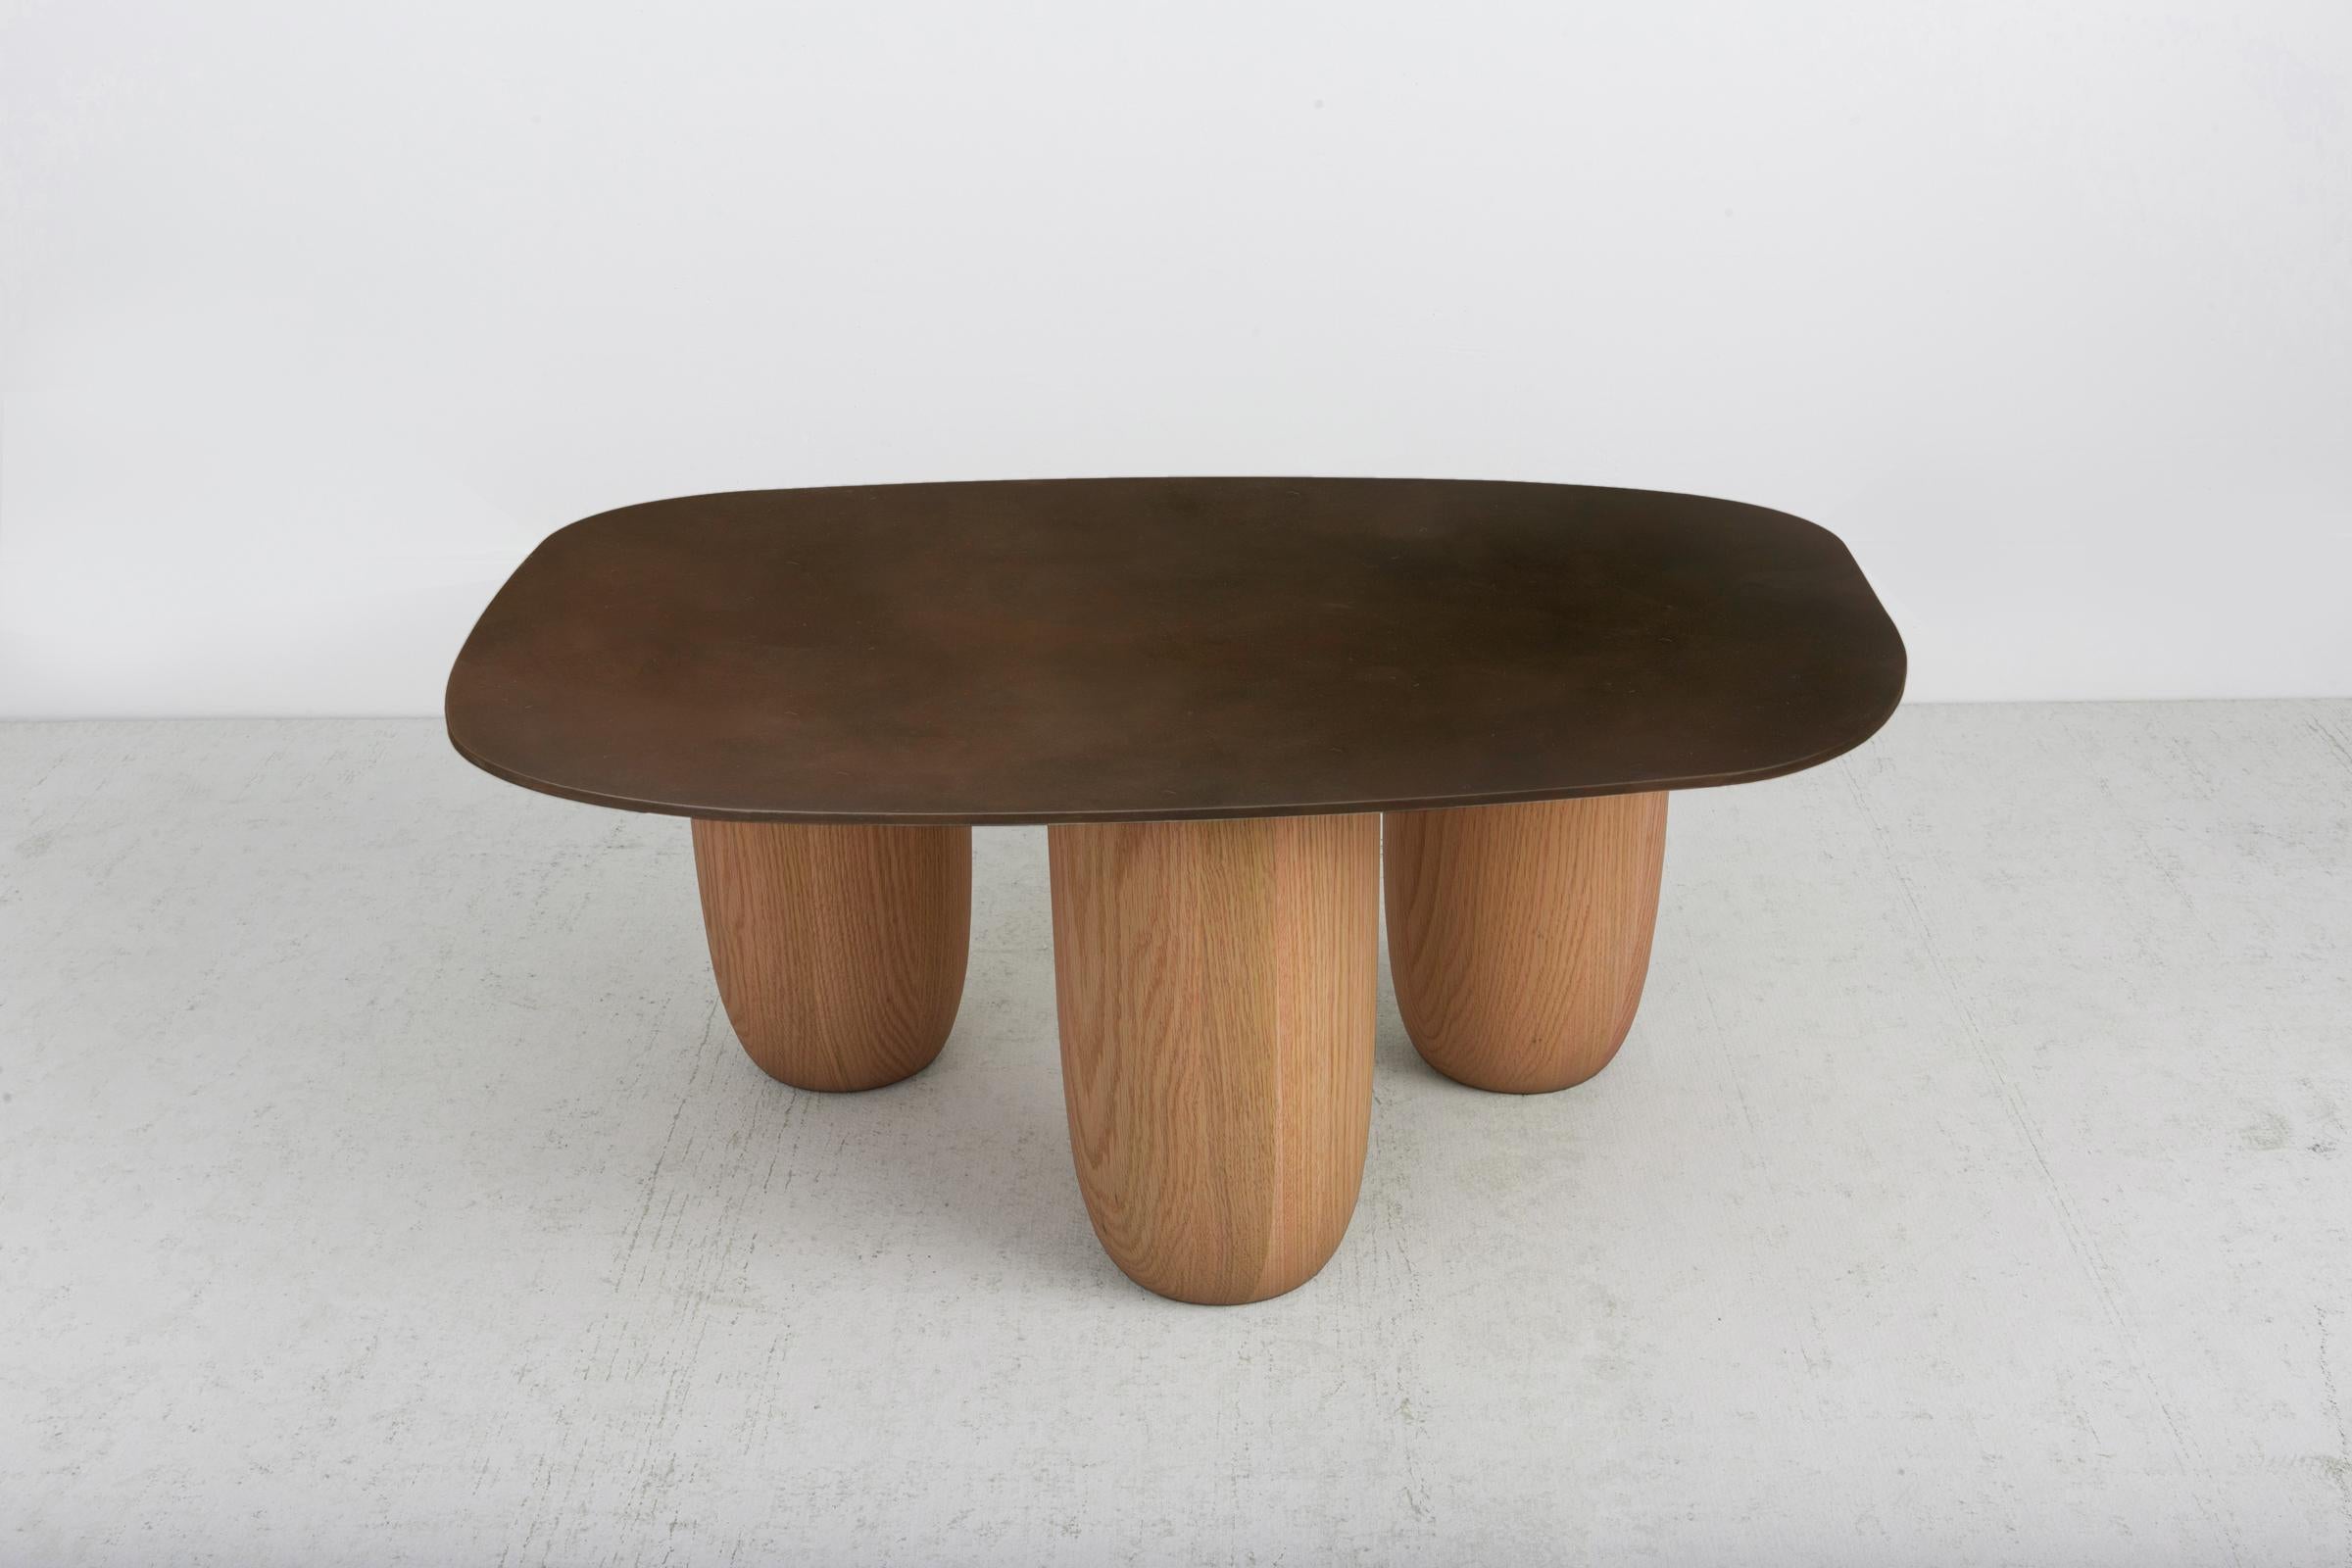 Contemporary Minimalist Low Tables Japanese Brown Patina Steel with Oak Legs Vivian Carbonell For Sale